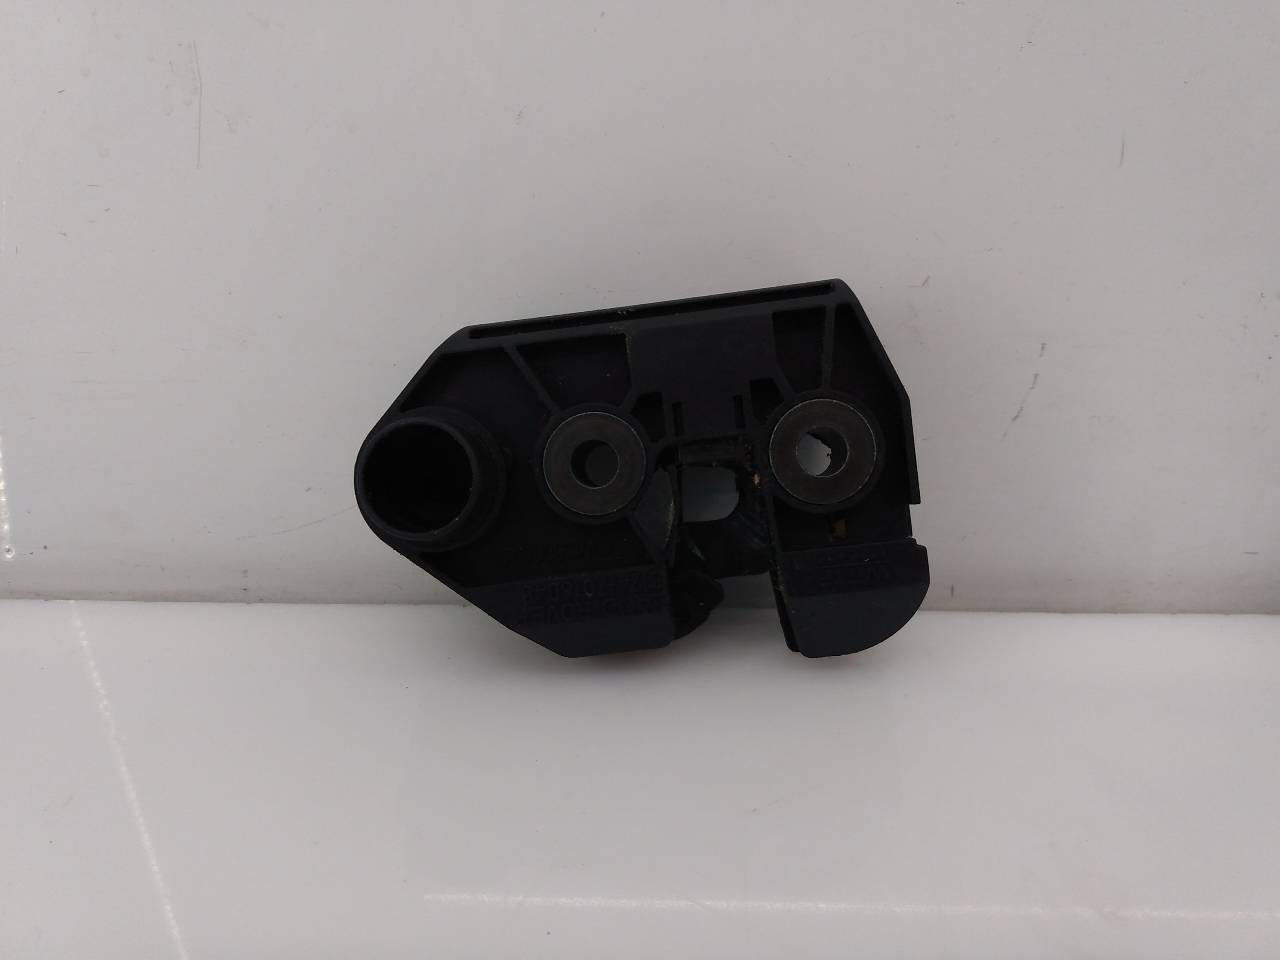 LAND ROVER Discovery 3 generation (2004-2009) Tailgate Boot Lock CWC500020, 51247016050, E1-B4-7-2 24032861